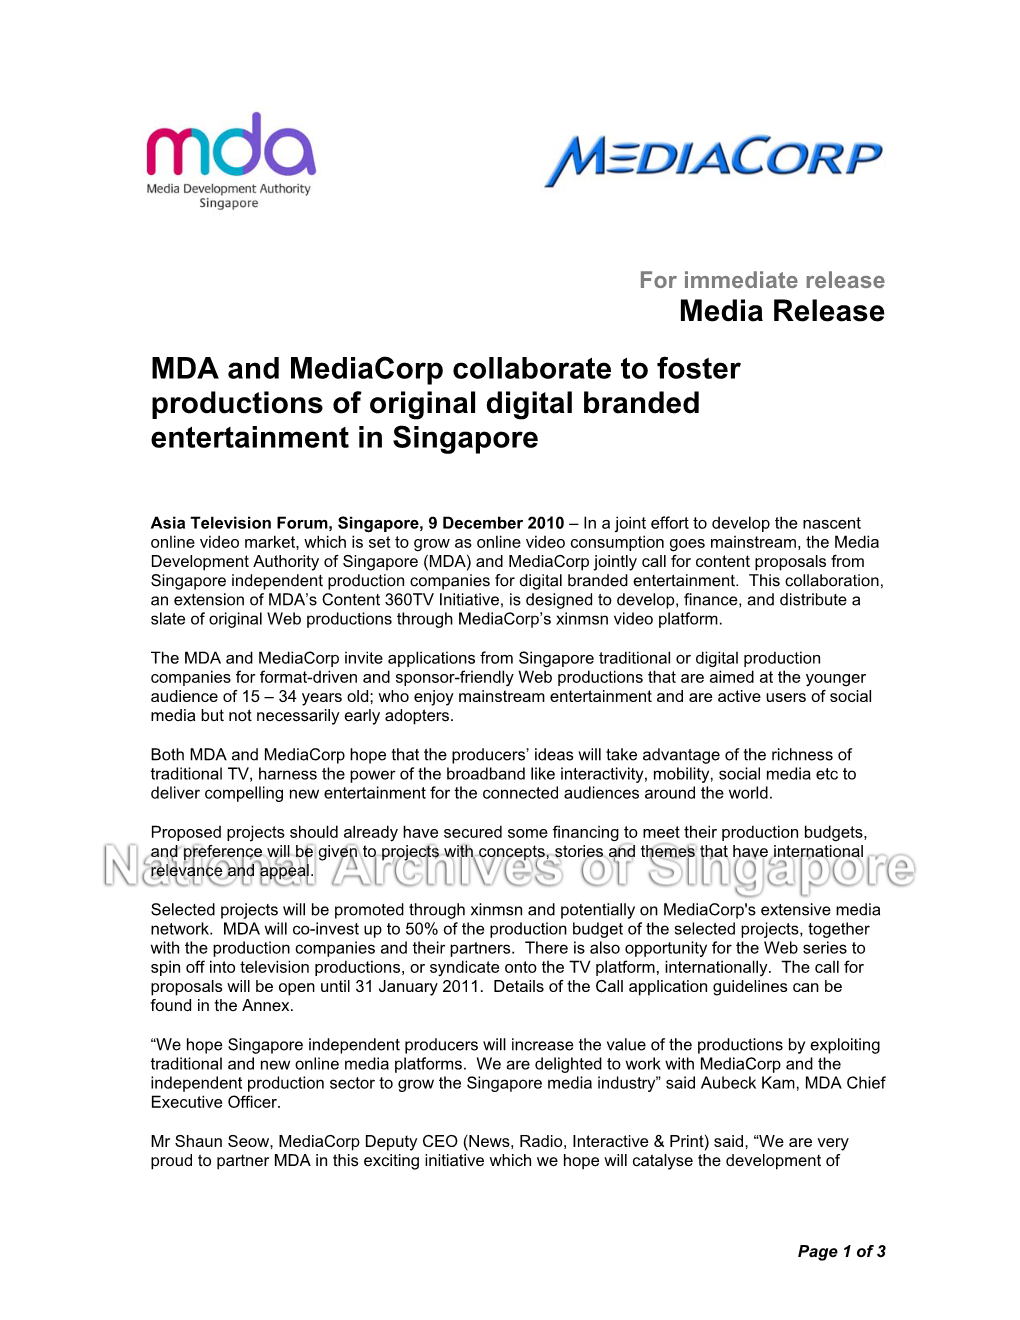 Media Release MDA and Mediacorp Collaborate to Foster Productions Of